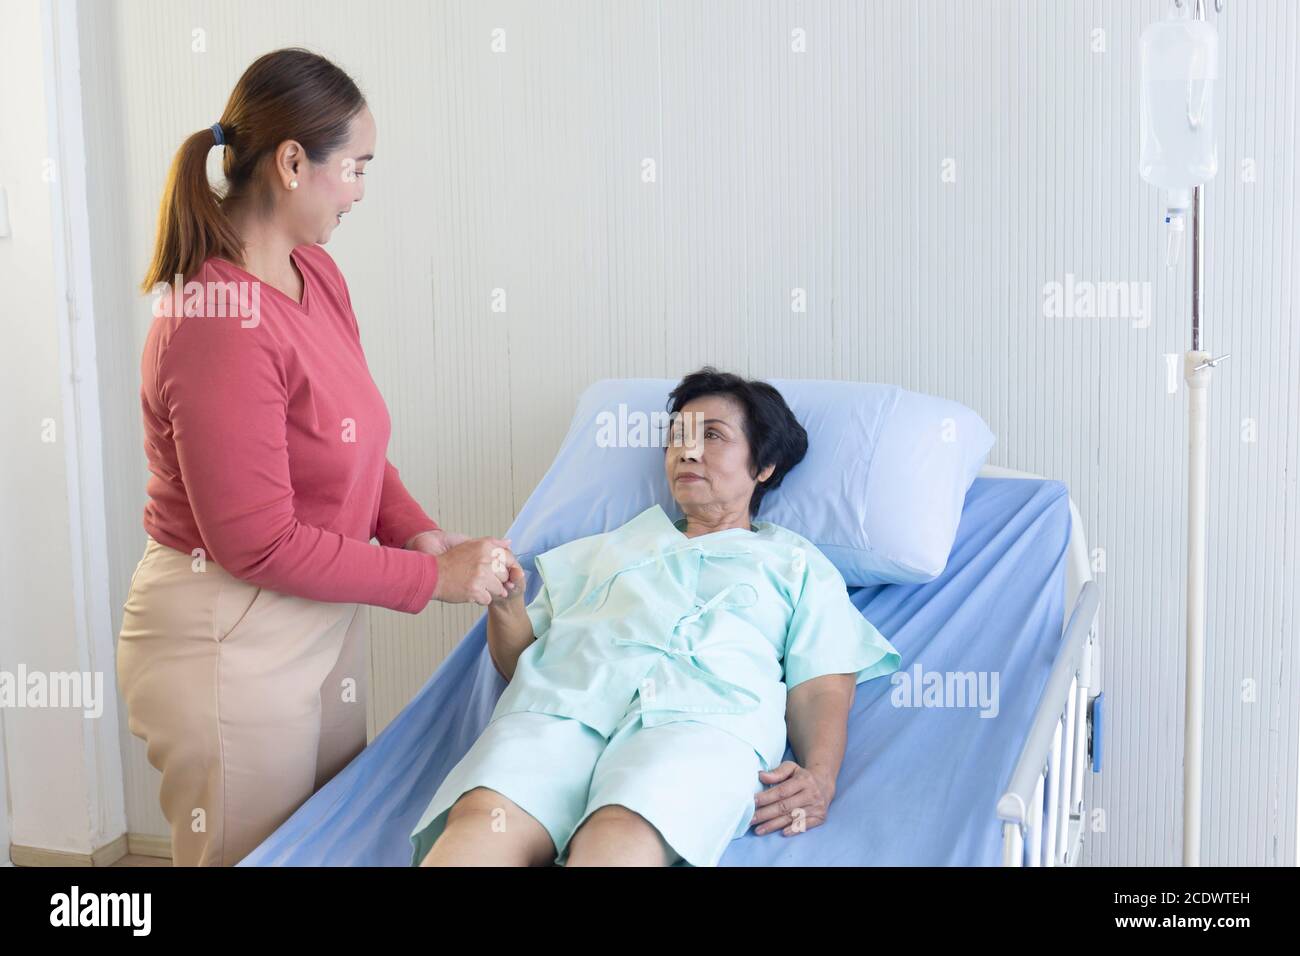 An Asian woman takes care of her sick mother in bed in a hospital. Stock Photo